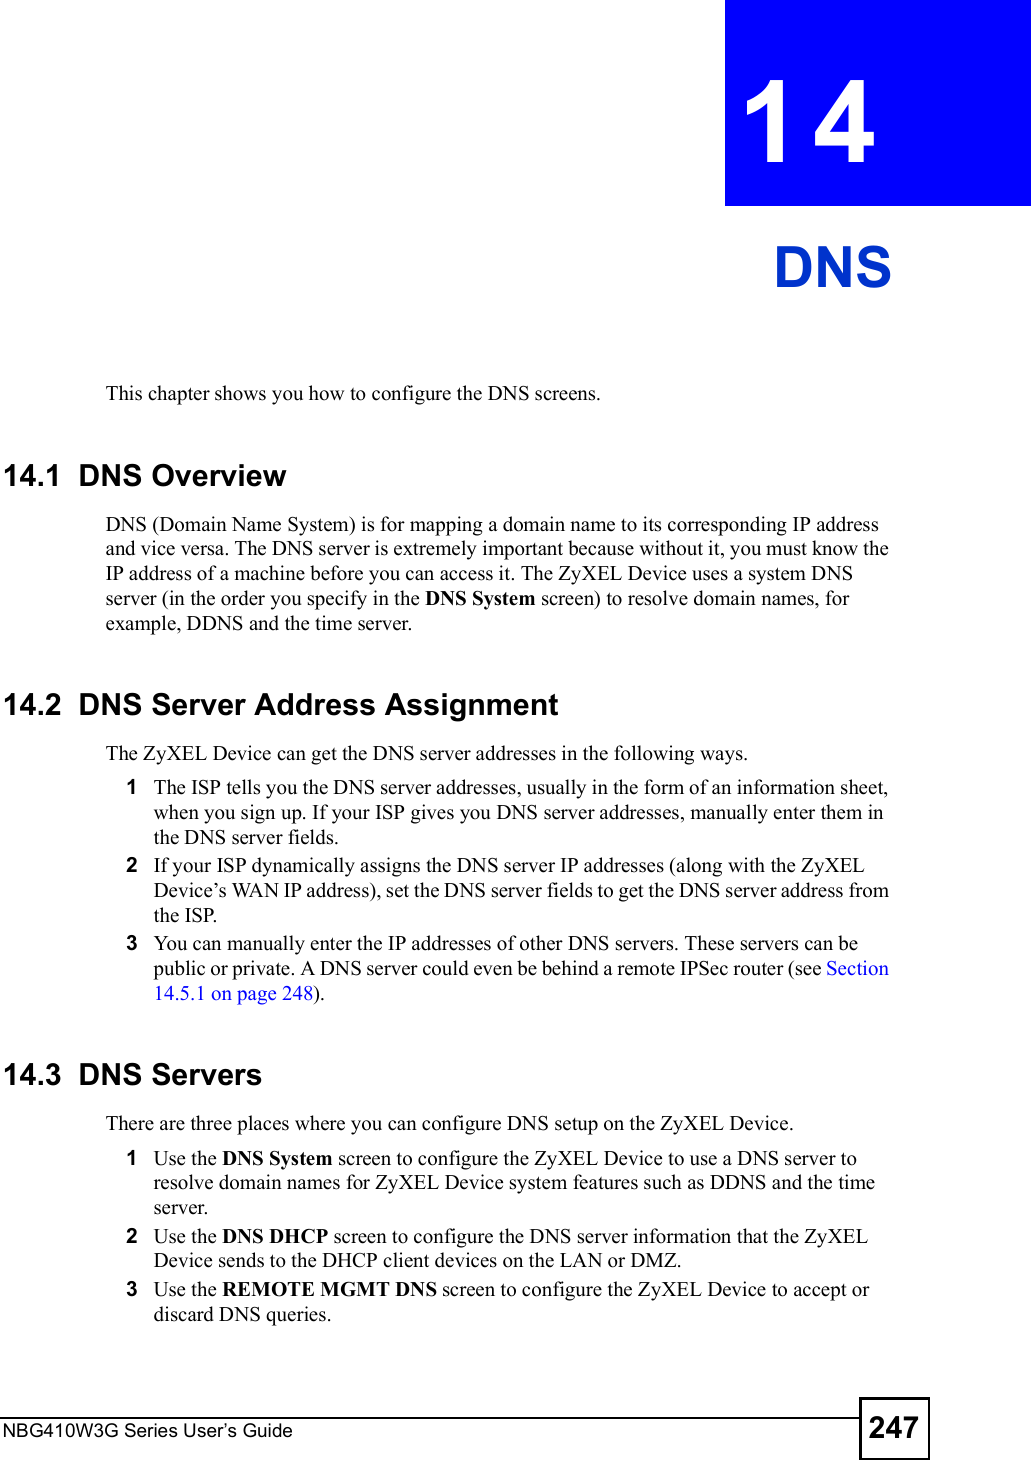 NBG410W3G Series User s Guide 247CHAPTER  14 DNSThis chapter shows you how to configure the DNS screens.14.1  DNS Overview DNS (Domain Name System) is for mapping a domain name to its corresponding IP address and vice versa. The DNS server is extremely important because without it, you must know the IP address of a machine before you can access it. The ZyXEL Device uses a system DNS server (in the order you specify in the DNS System screen) to resolve domain names, for example, DDNS and the time server.14.2  DNS Server Address AssignmentThe ZyXEL Device can get the DNS server addresses in the following ways.1The ISP tells you the DNS server addresses, usually in the form of an information sheet, when you sign up. If your ISP gives you DNS server addresses, manually enter them in the DNS server fields.2If your ISP dynamically assigns the DNS server IP addresses (along with the ZyXEL Device!s WAN IP address), set the DNS server fields to get the DNS server address from the ISP. 3You can manually enter the IP addresses of other DNS servers. These servers can be public or private. A DNS server could even be behind a remote IPSec router (see Section 14.5.1 on page 248).14.3  DNS ServersThere are three places where you can configure DNS setup on the ZyXEL Device.1Use the DNS System screen to configure the ZyXEL Device to use a DNS server to resolve domain names for ZyXEL Device system features such as DDNS and the time server.2Use the DNS DHCP screen to configure the DNS server information that the ZyXEL Device sends to the DHCP client devices on the LAN or DMZ.3Use the REMOTE MGMT DNS screen to configure the ZyXEL Device to accept or discard DNS queries.